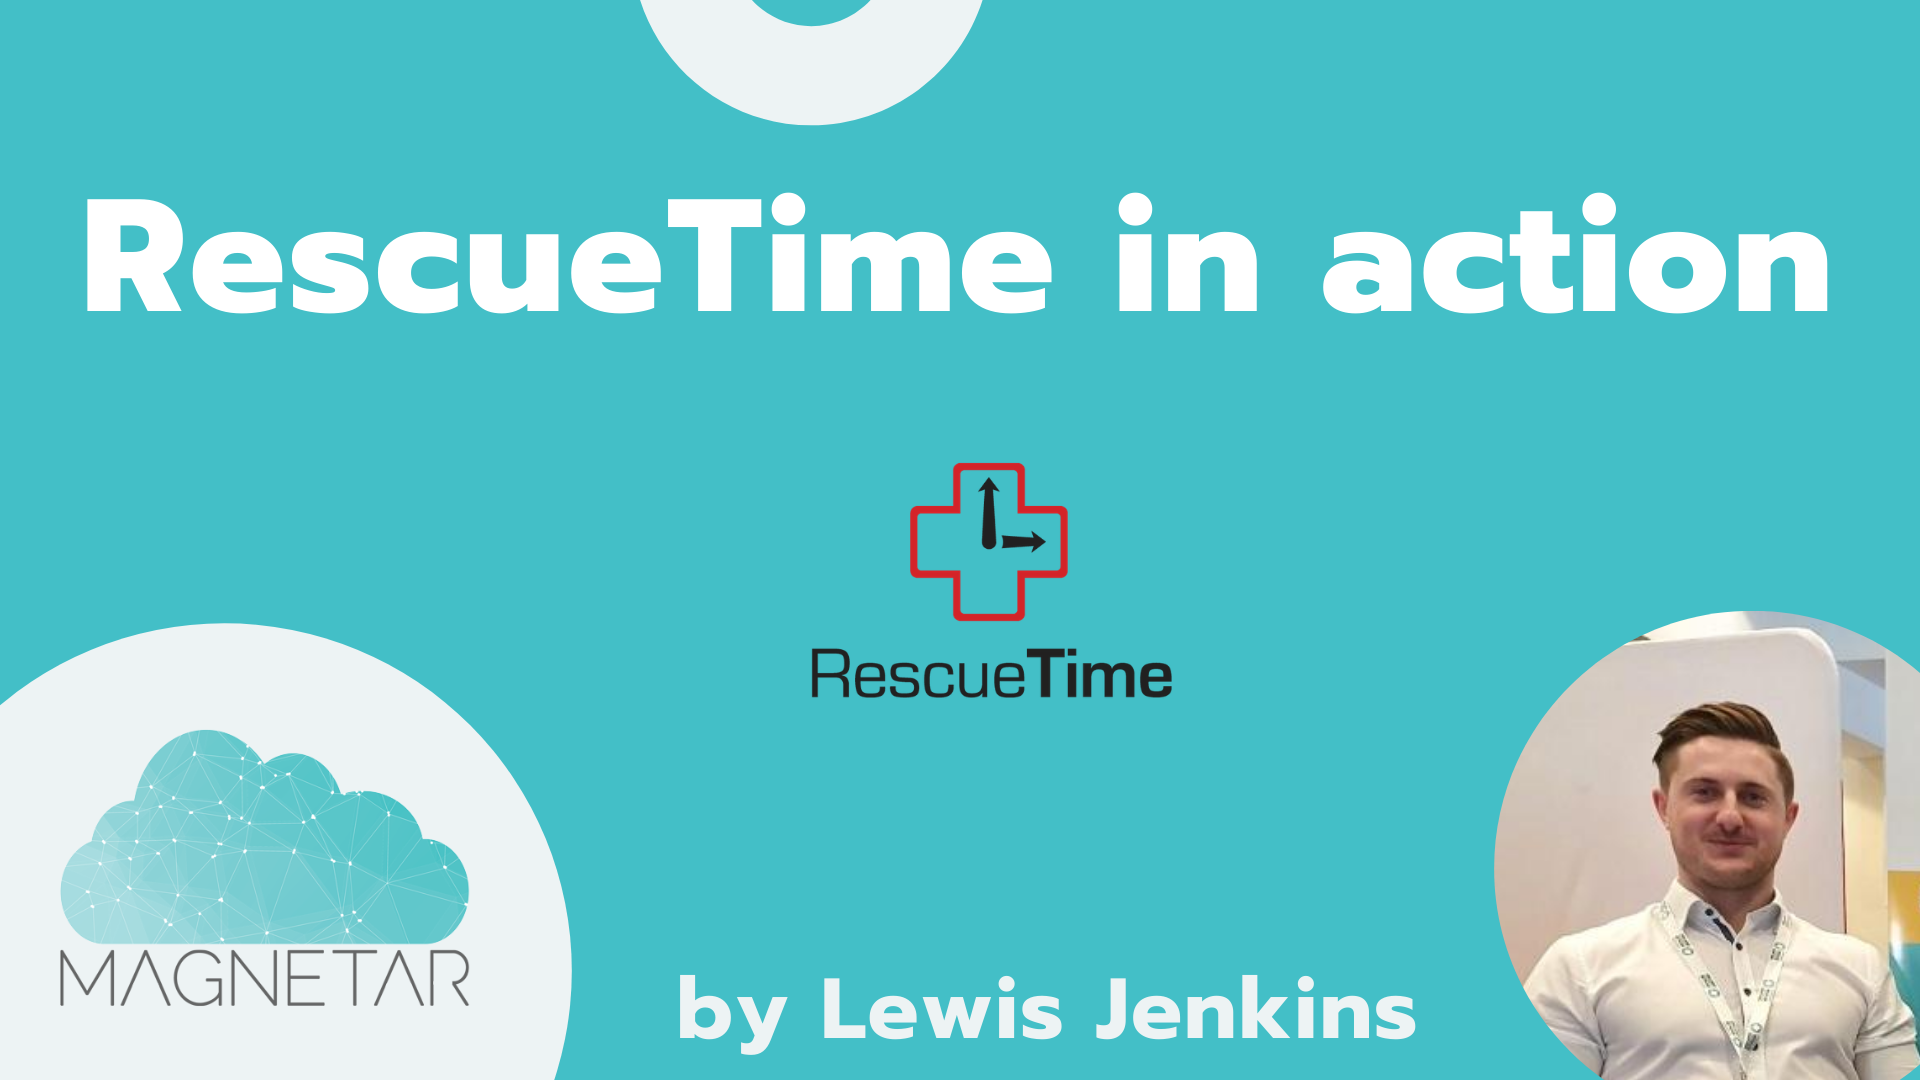 Video: RescueTime in action